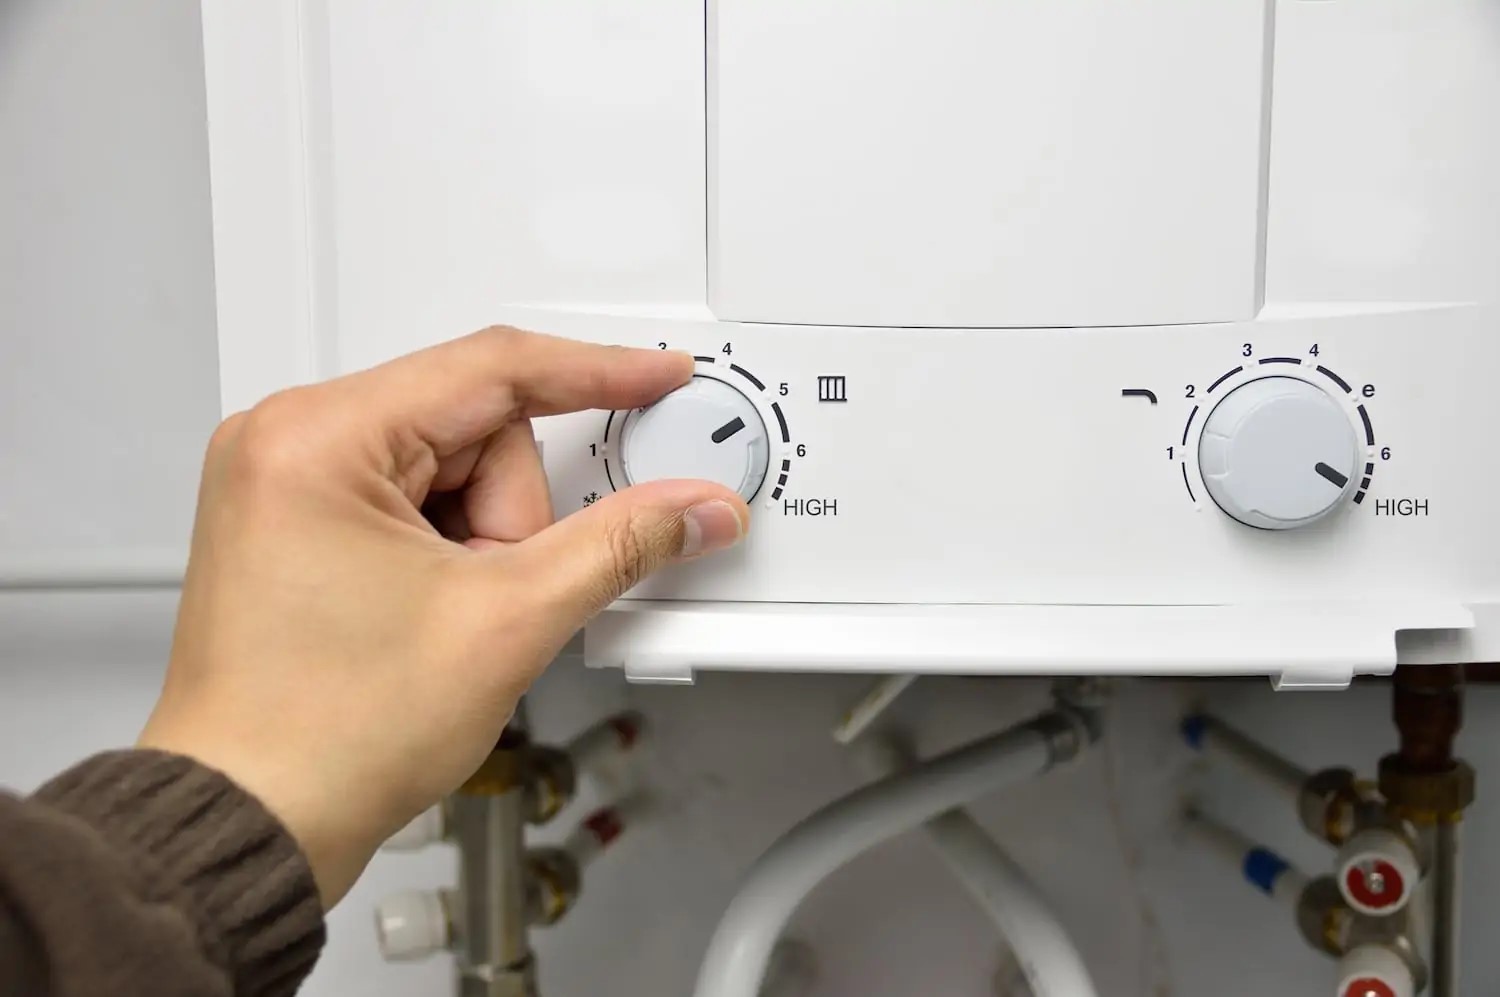 Person adjusting setting on tankless water heater